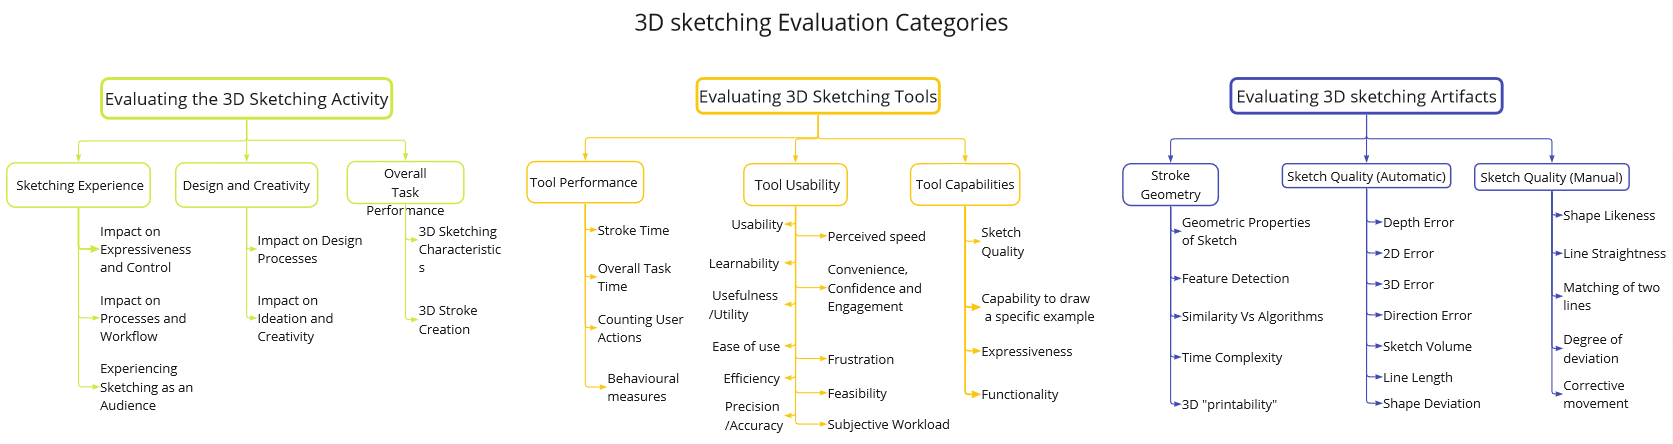 Toward More Comprehensive Evaluations of 3D Immersive Sketching, Drawing, and Painting